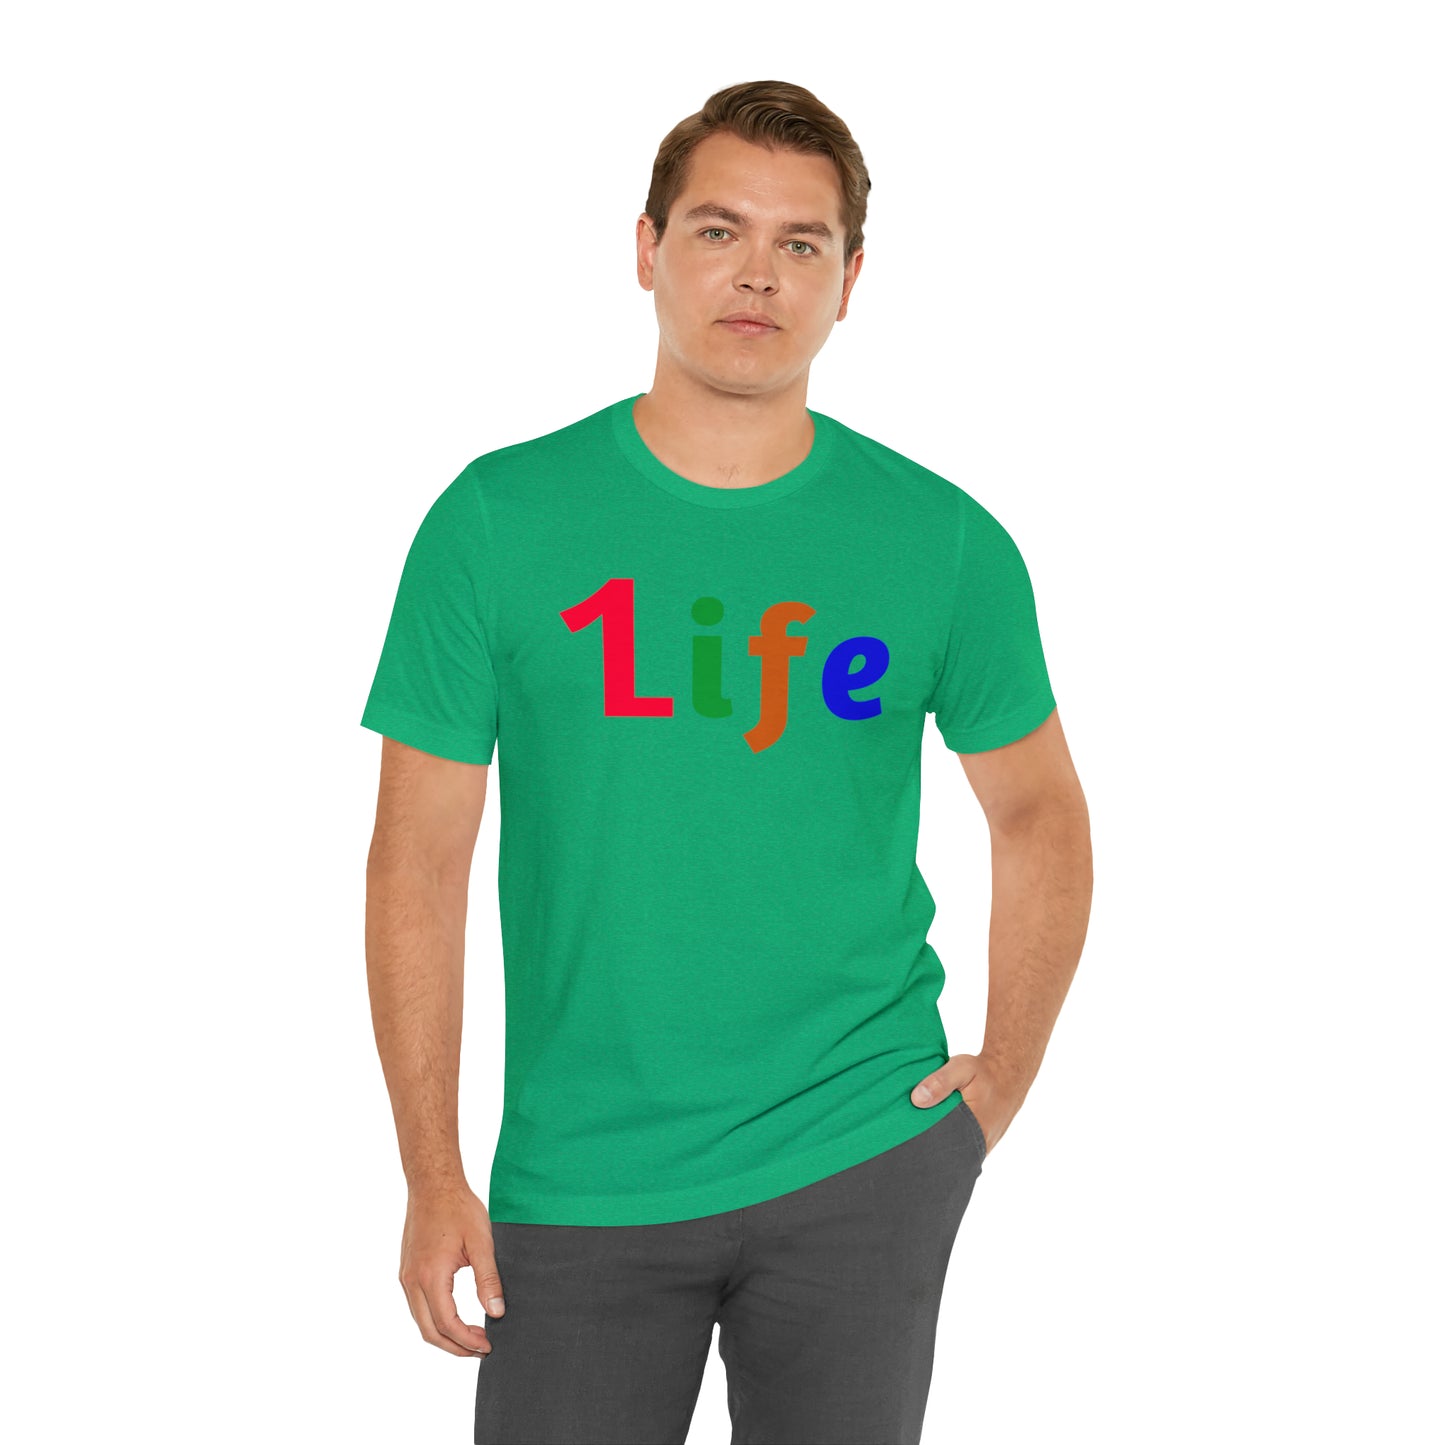 One life Shirt 1life shirt Live Your Life You Only Have One Life To Live Shirt